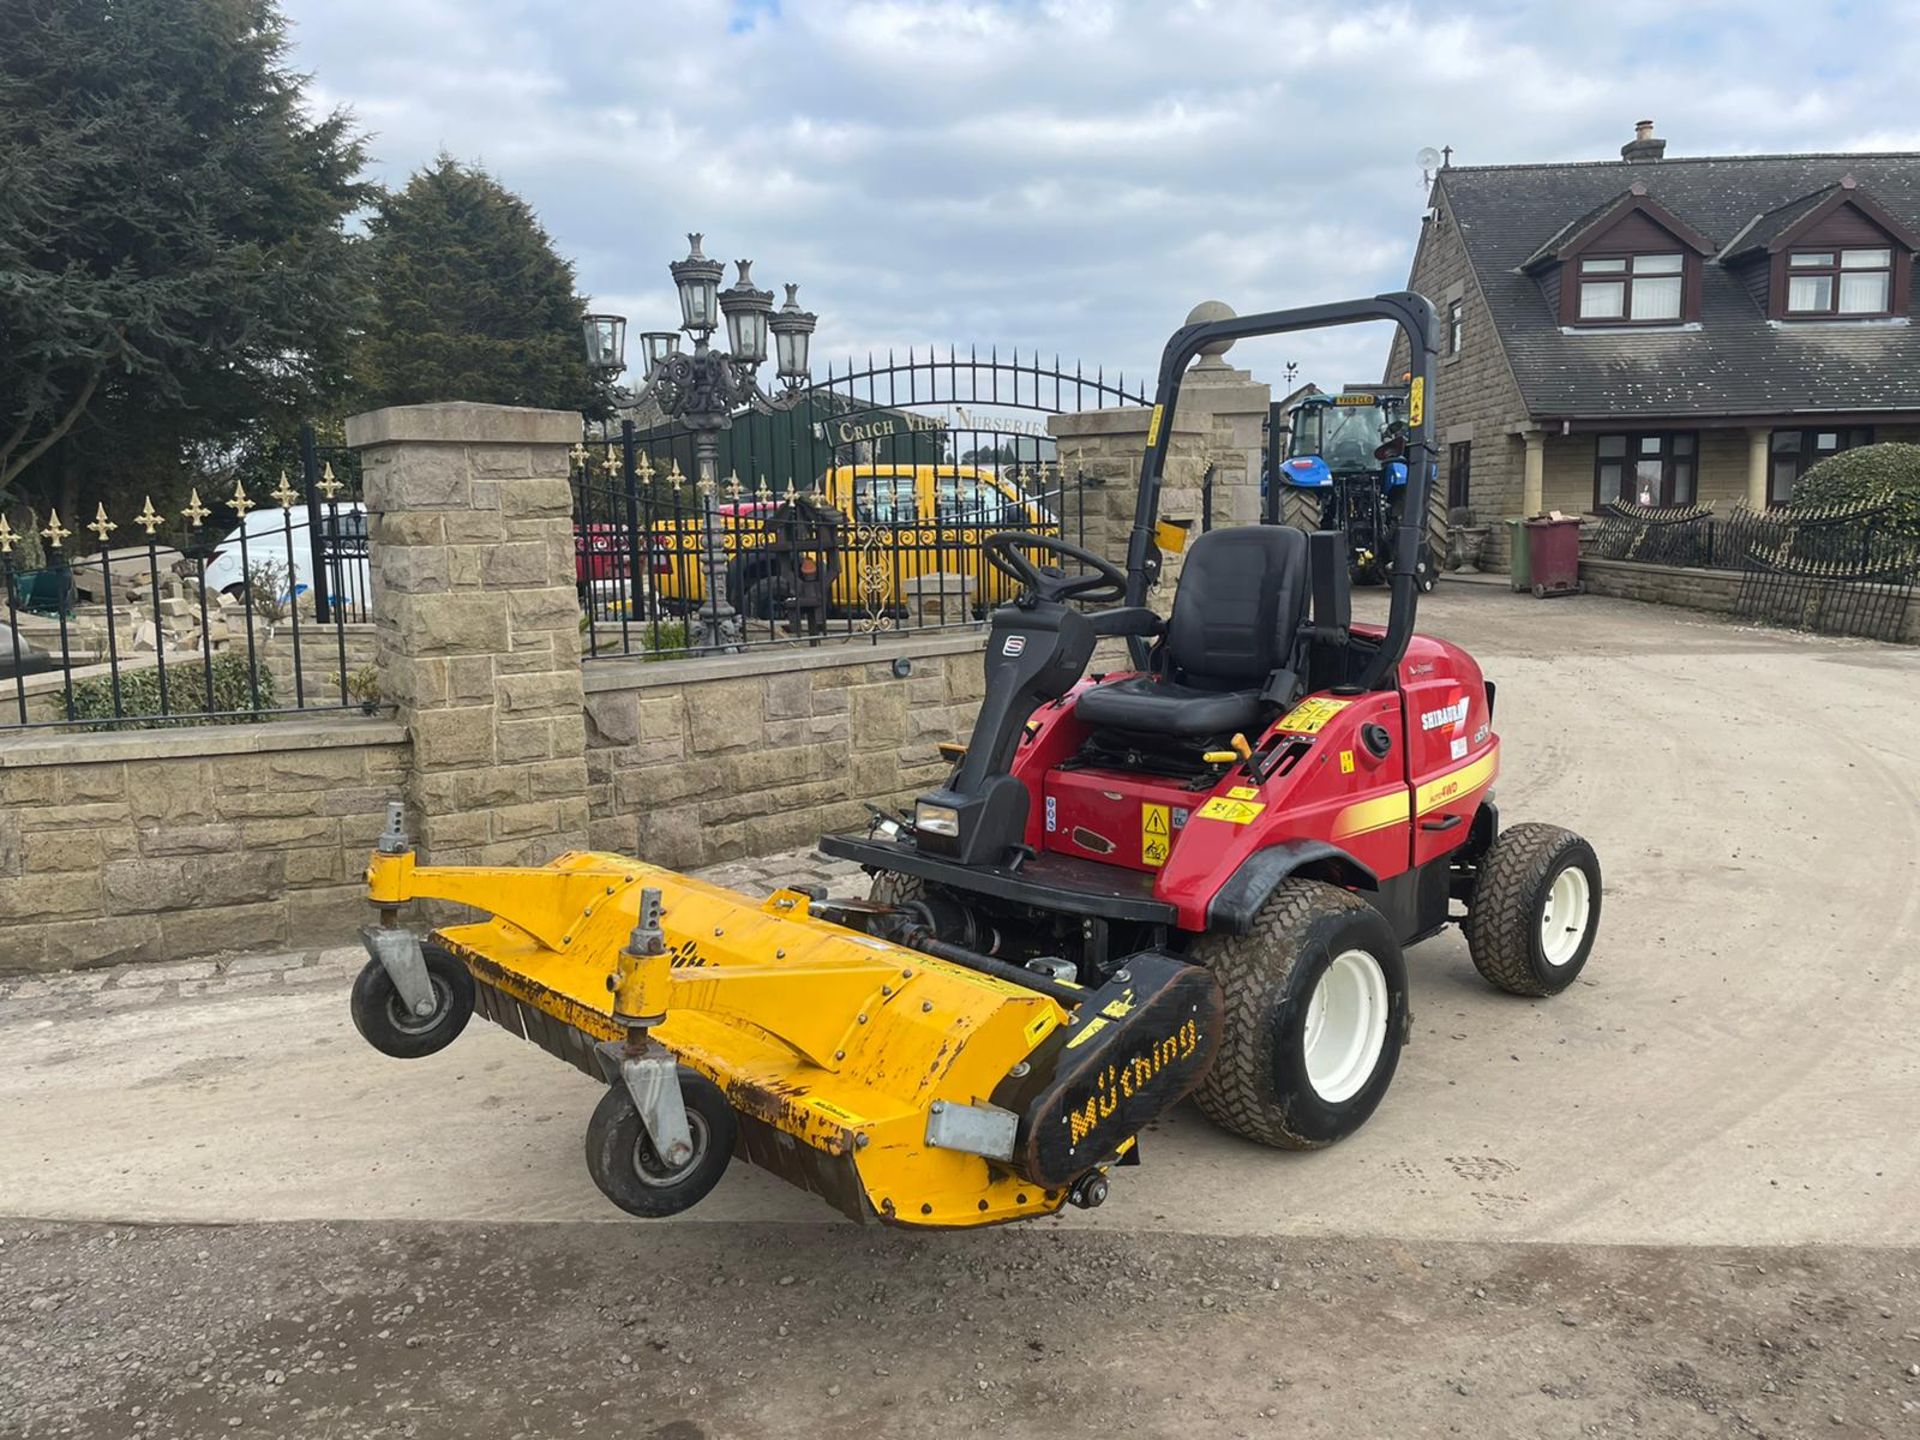 2014 SHIBAURA CM374 RIDE ON MOWER WITH A 2014 MUTHING FLAIL DECK, RUNS DRIVES AND CUTS *PLUS VAT* - Image 2 of 10